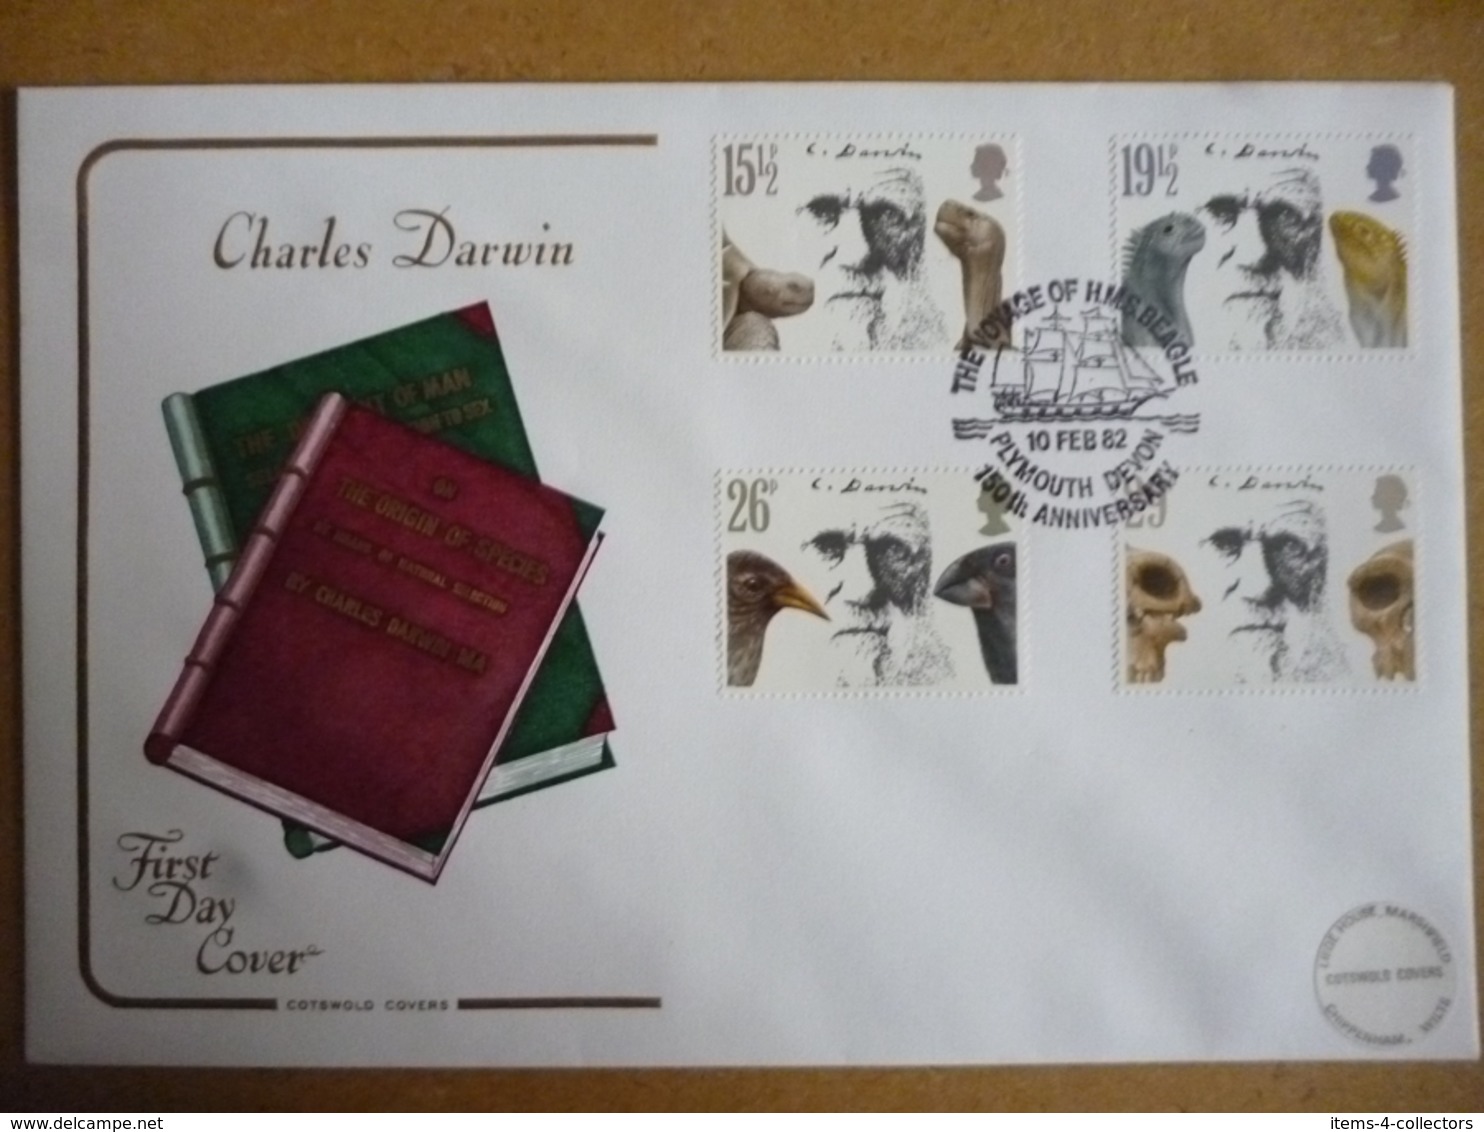 GREAT BRITAIN [UK] SG 1175 CHARLES DARWIN DEATH ANNIVERSARY (1982)  FDC SPECIAL COVER THE VOYAGE OF H.M.S.BEAGLE - 1971-1980 Dezimalausgaben